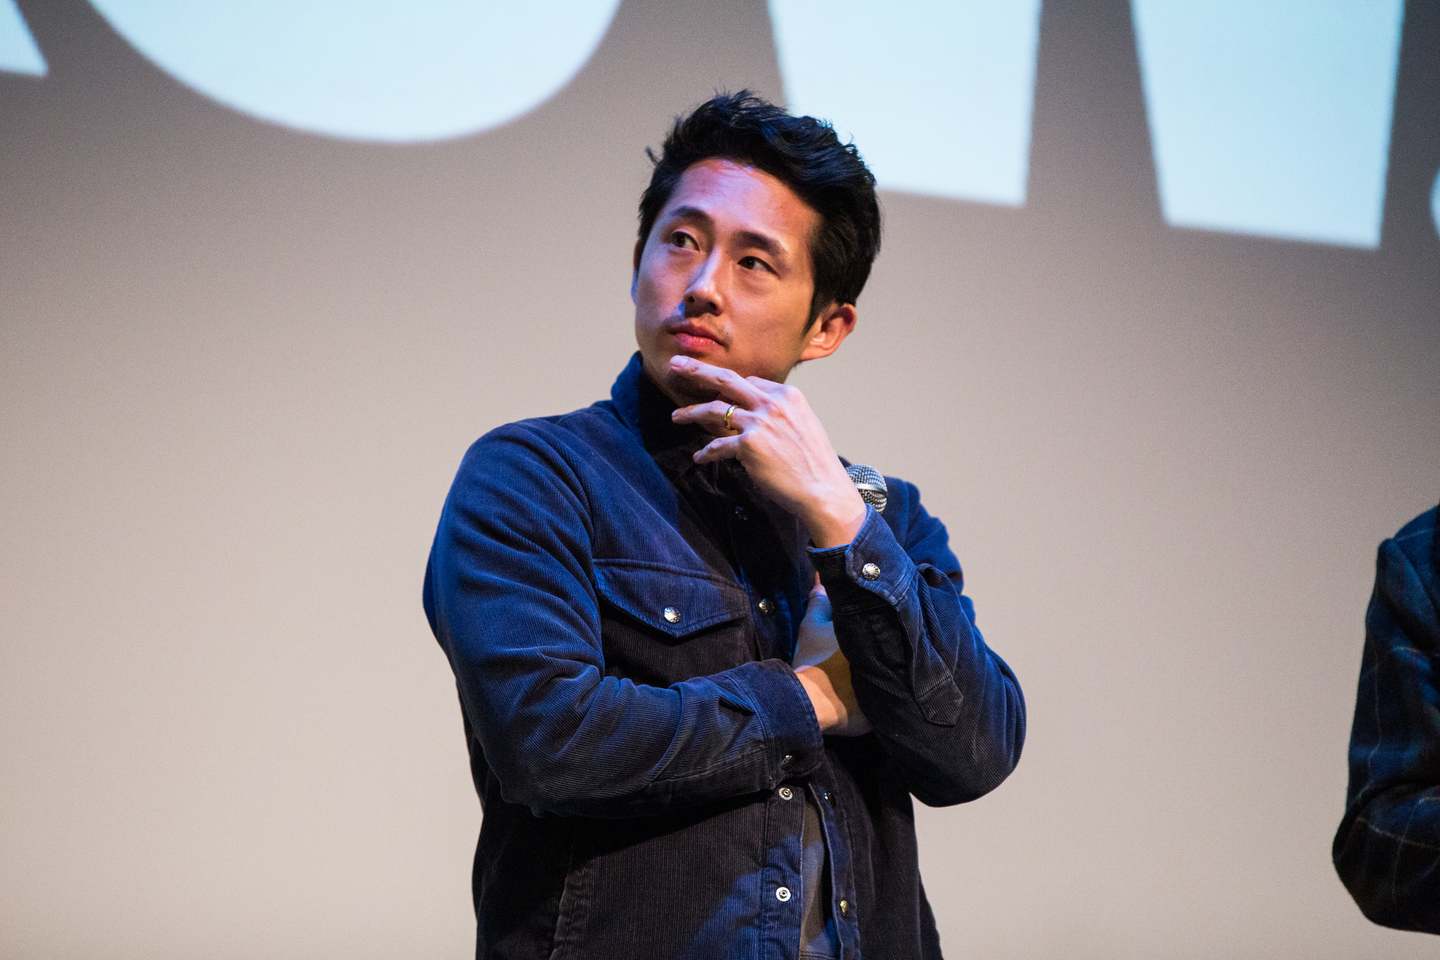 Steven Yeun at the Sorry to Bother You Q&A. Photo by Alexa Gonzalez Wagner